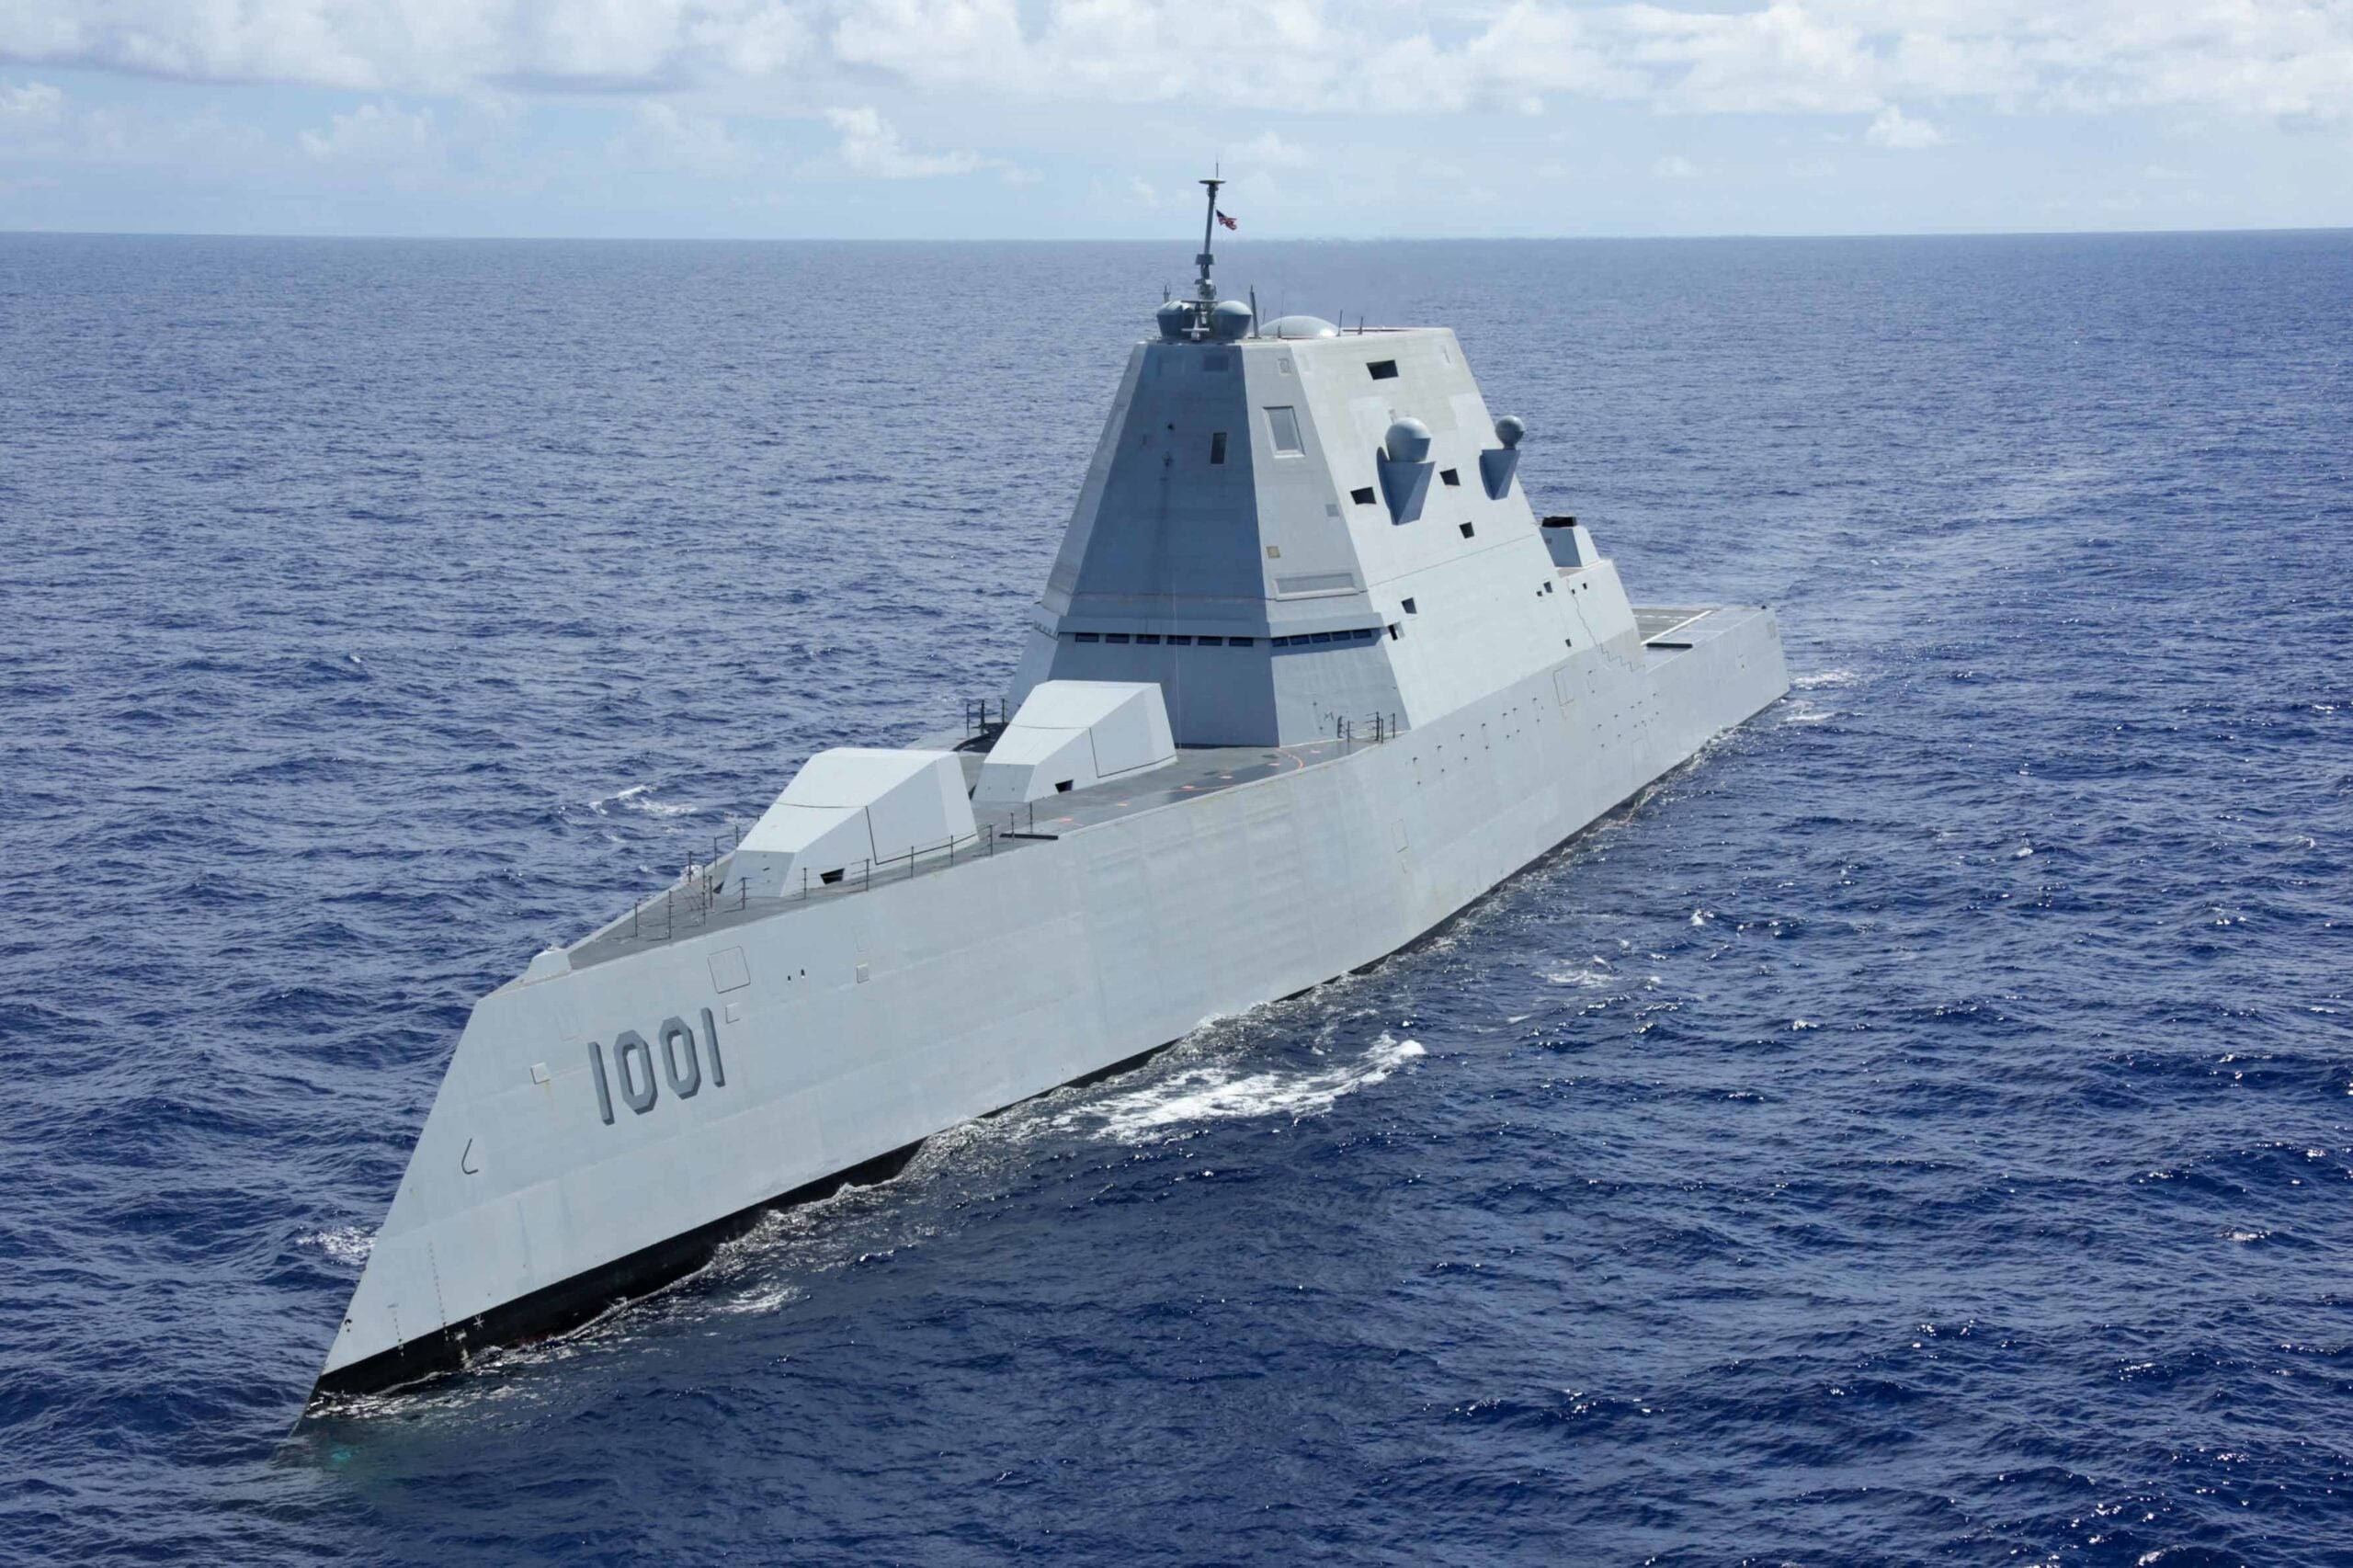 PACIFIC OCEAN (July 28, 2022) The Zumwalt-class guided-missile destroyer USS Michael Monsoor (DDG 1001) sails in formation during Rim of the Pacific (RIMPAC) 2022. Twenty-six nations, 38 ships, three submarines, more than 30 unmanned systems, approximately 170 aircraft and 25,000 personnel are participating in RIMPAC from June 29 to Aug. 4 in and around the Hawaiian Islands and Southern California. The worldÕs largest international maritime exercise, RIMPAC provides a unique training opportunity while fostering and sustaining cooperative relationships among participants critical to ensuring the safety of sea lanes and security on the worldÕs oceans. RIMPAC 2022 is the 28th exercise in the series that began in 1971. (U.S. Navy photo by Mass Communication Specialist 3rd Class Aleksandr Freutel)